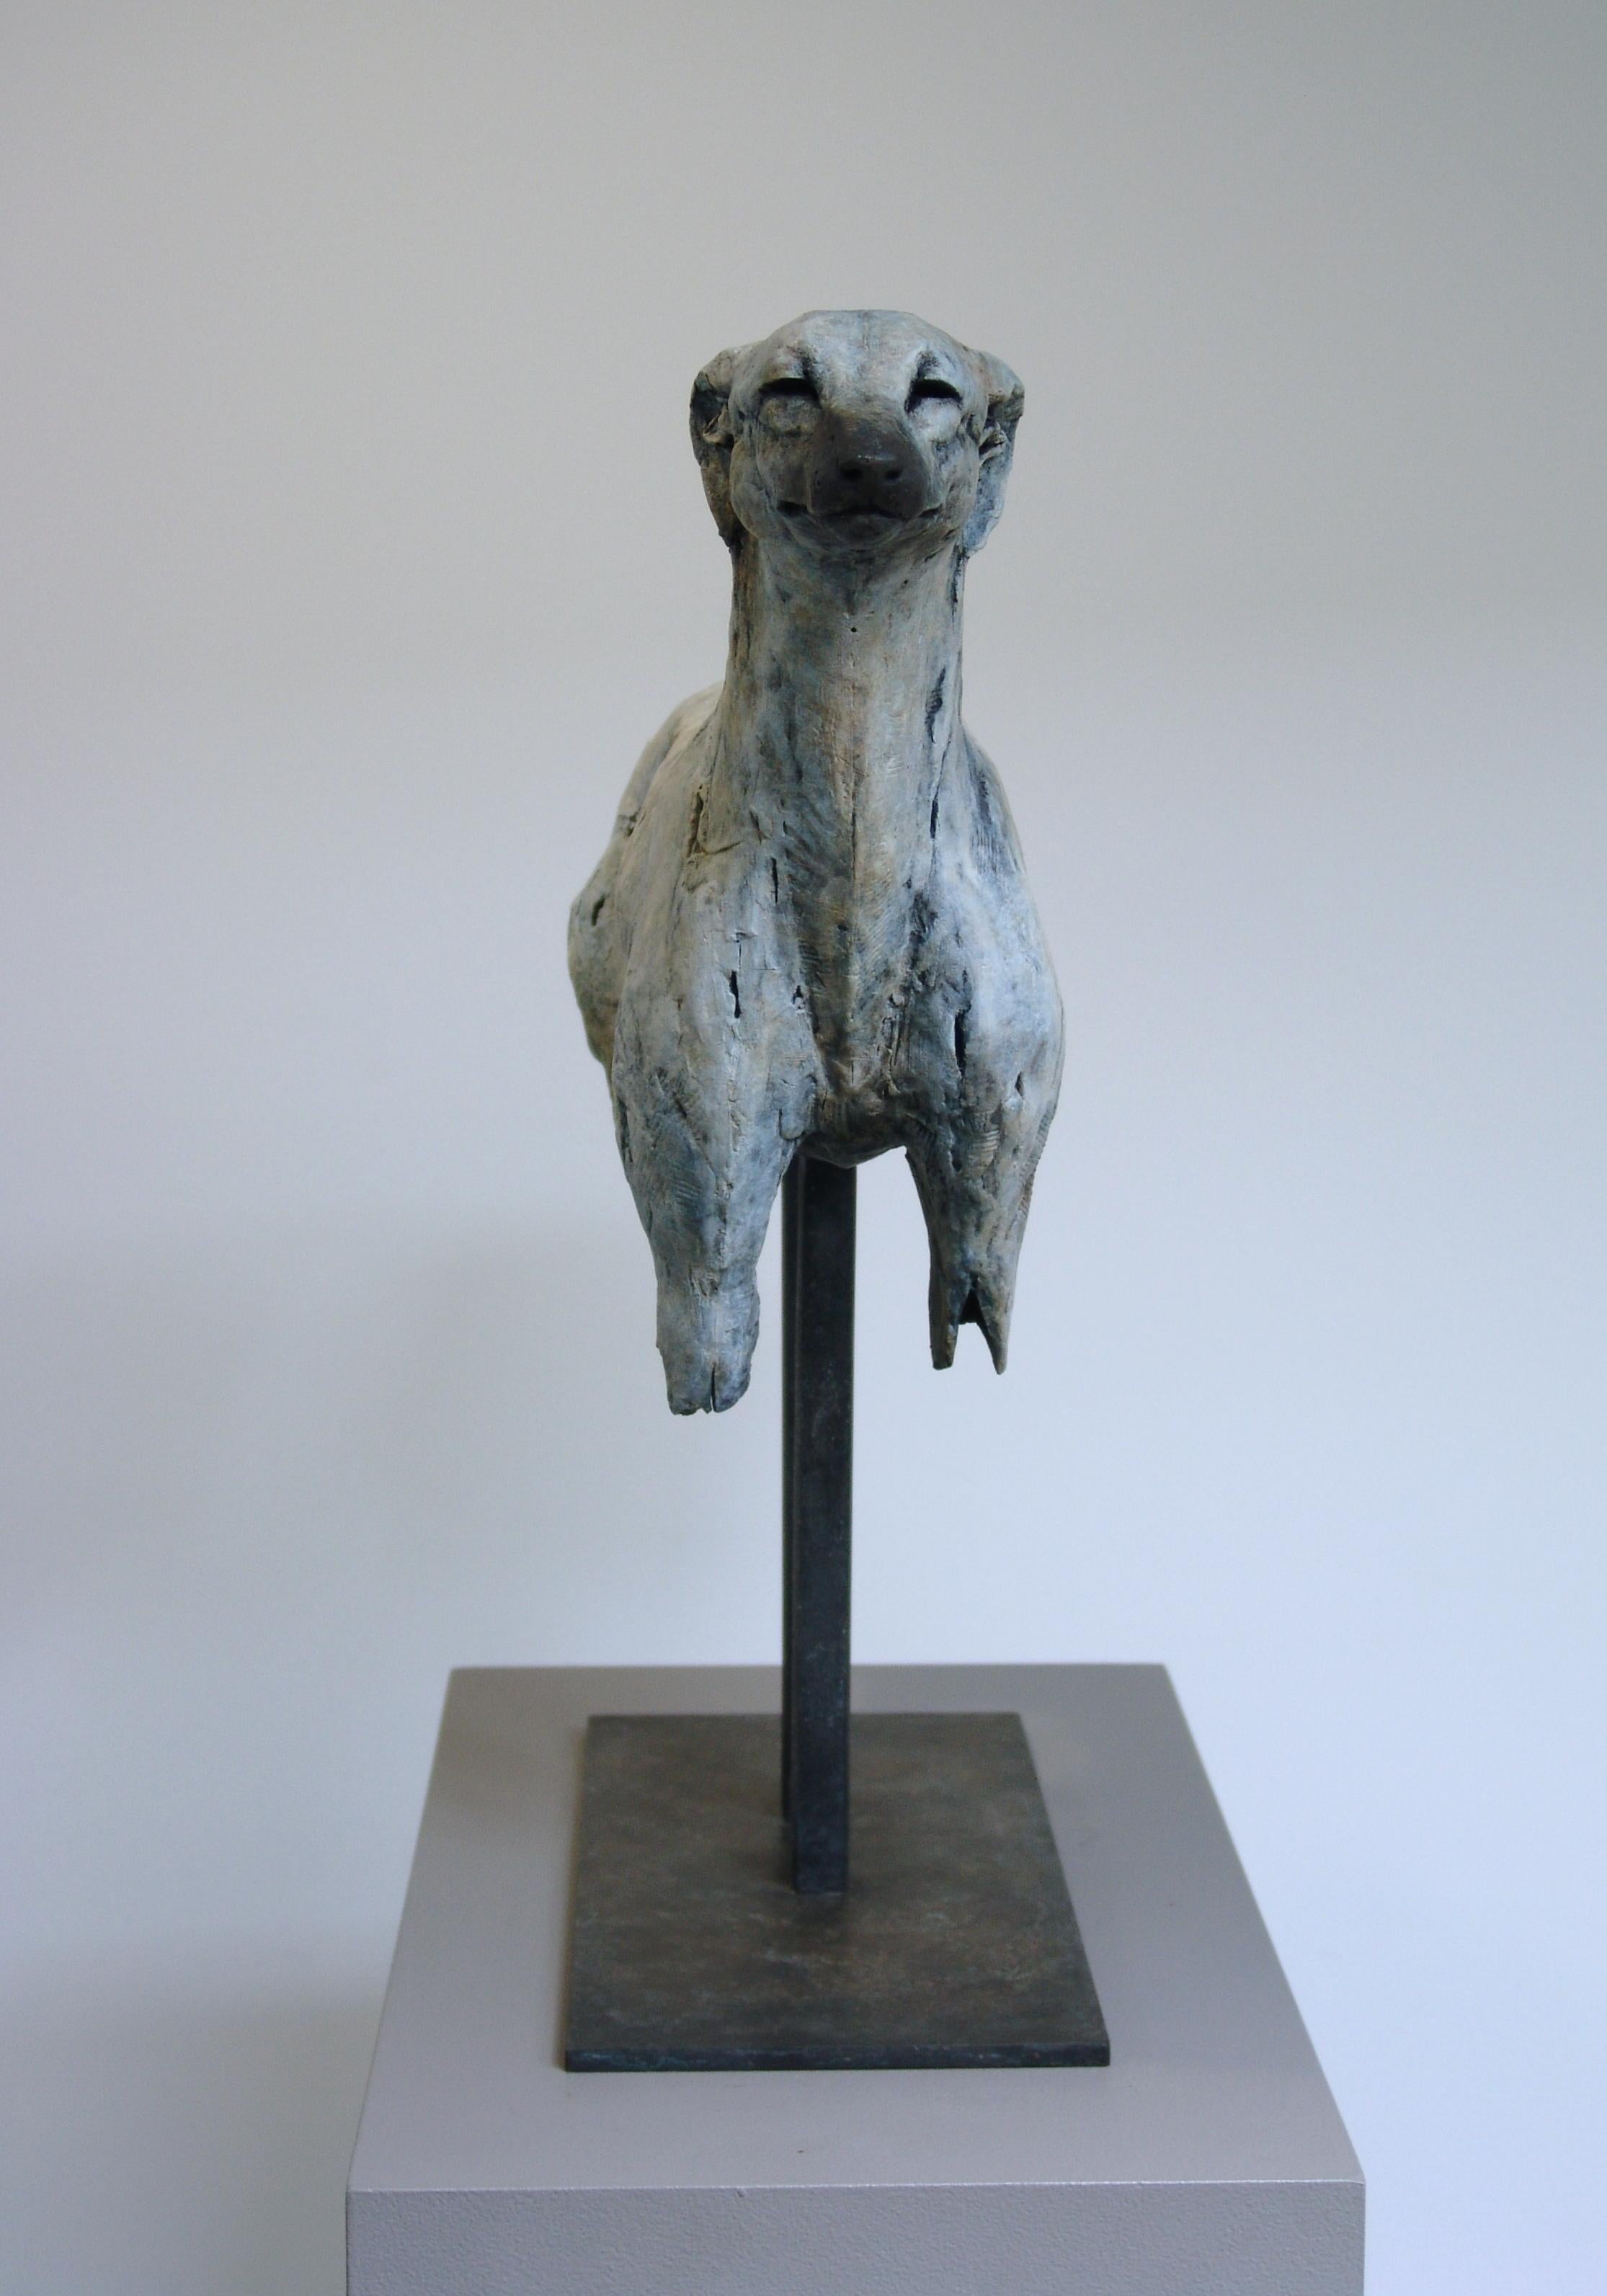 Nichola Theakston (1967) has established herself as one of the UK’s foremost contemporary sculptors working within the animal genre. 

With the ''Sighthound'' Nichola shows how exquisite she can capture the feelings and expressions in an animal. The